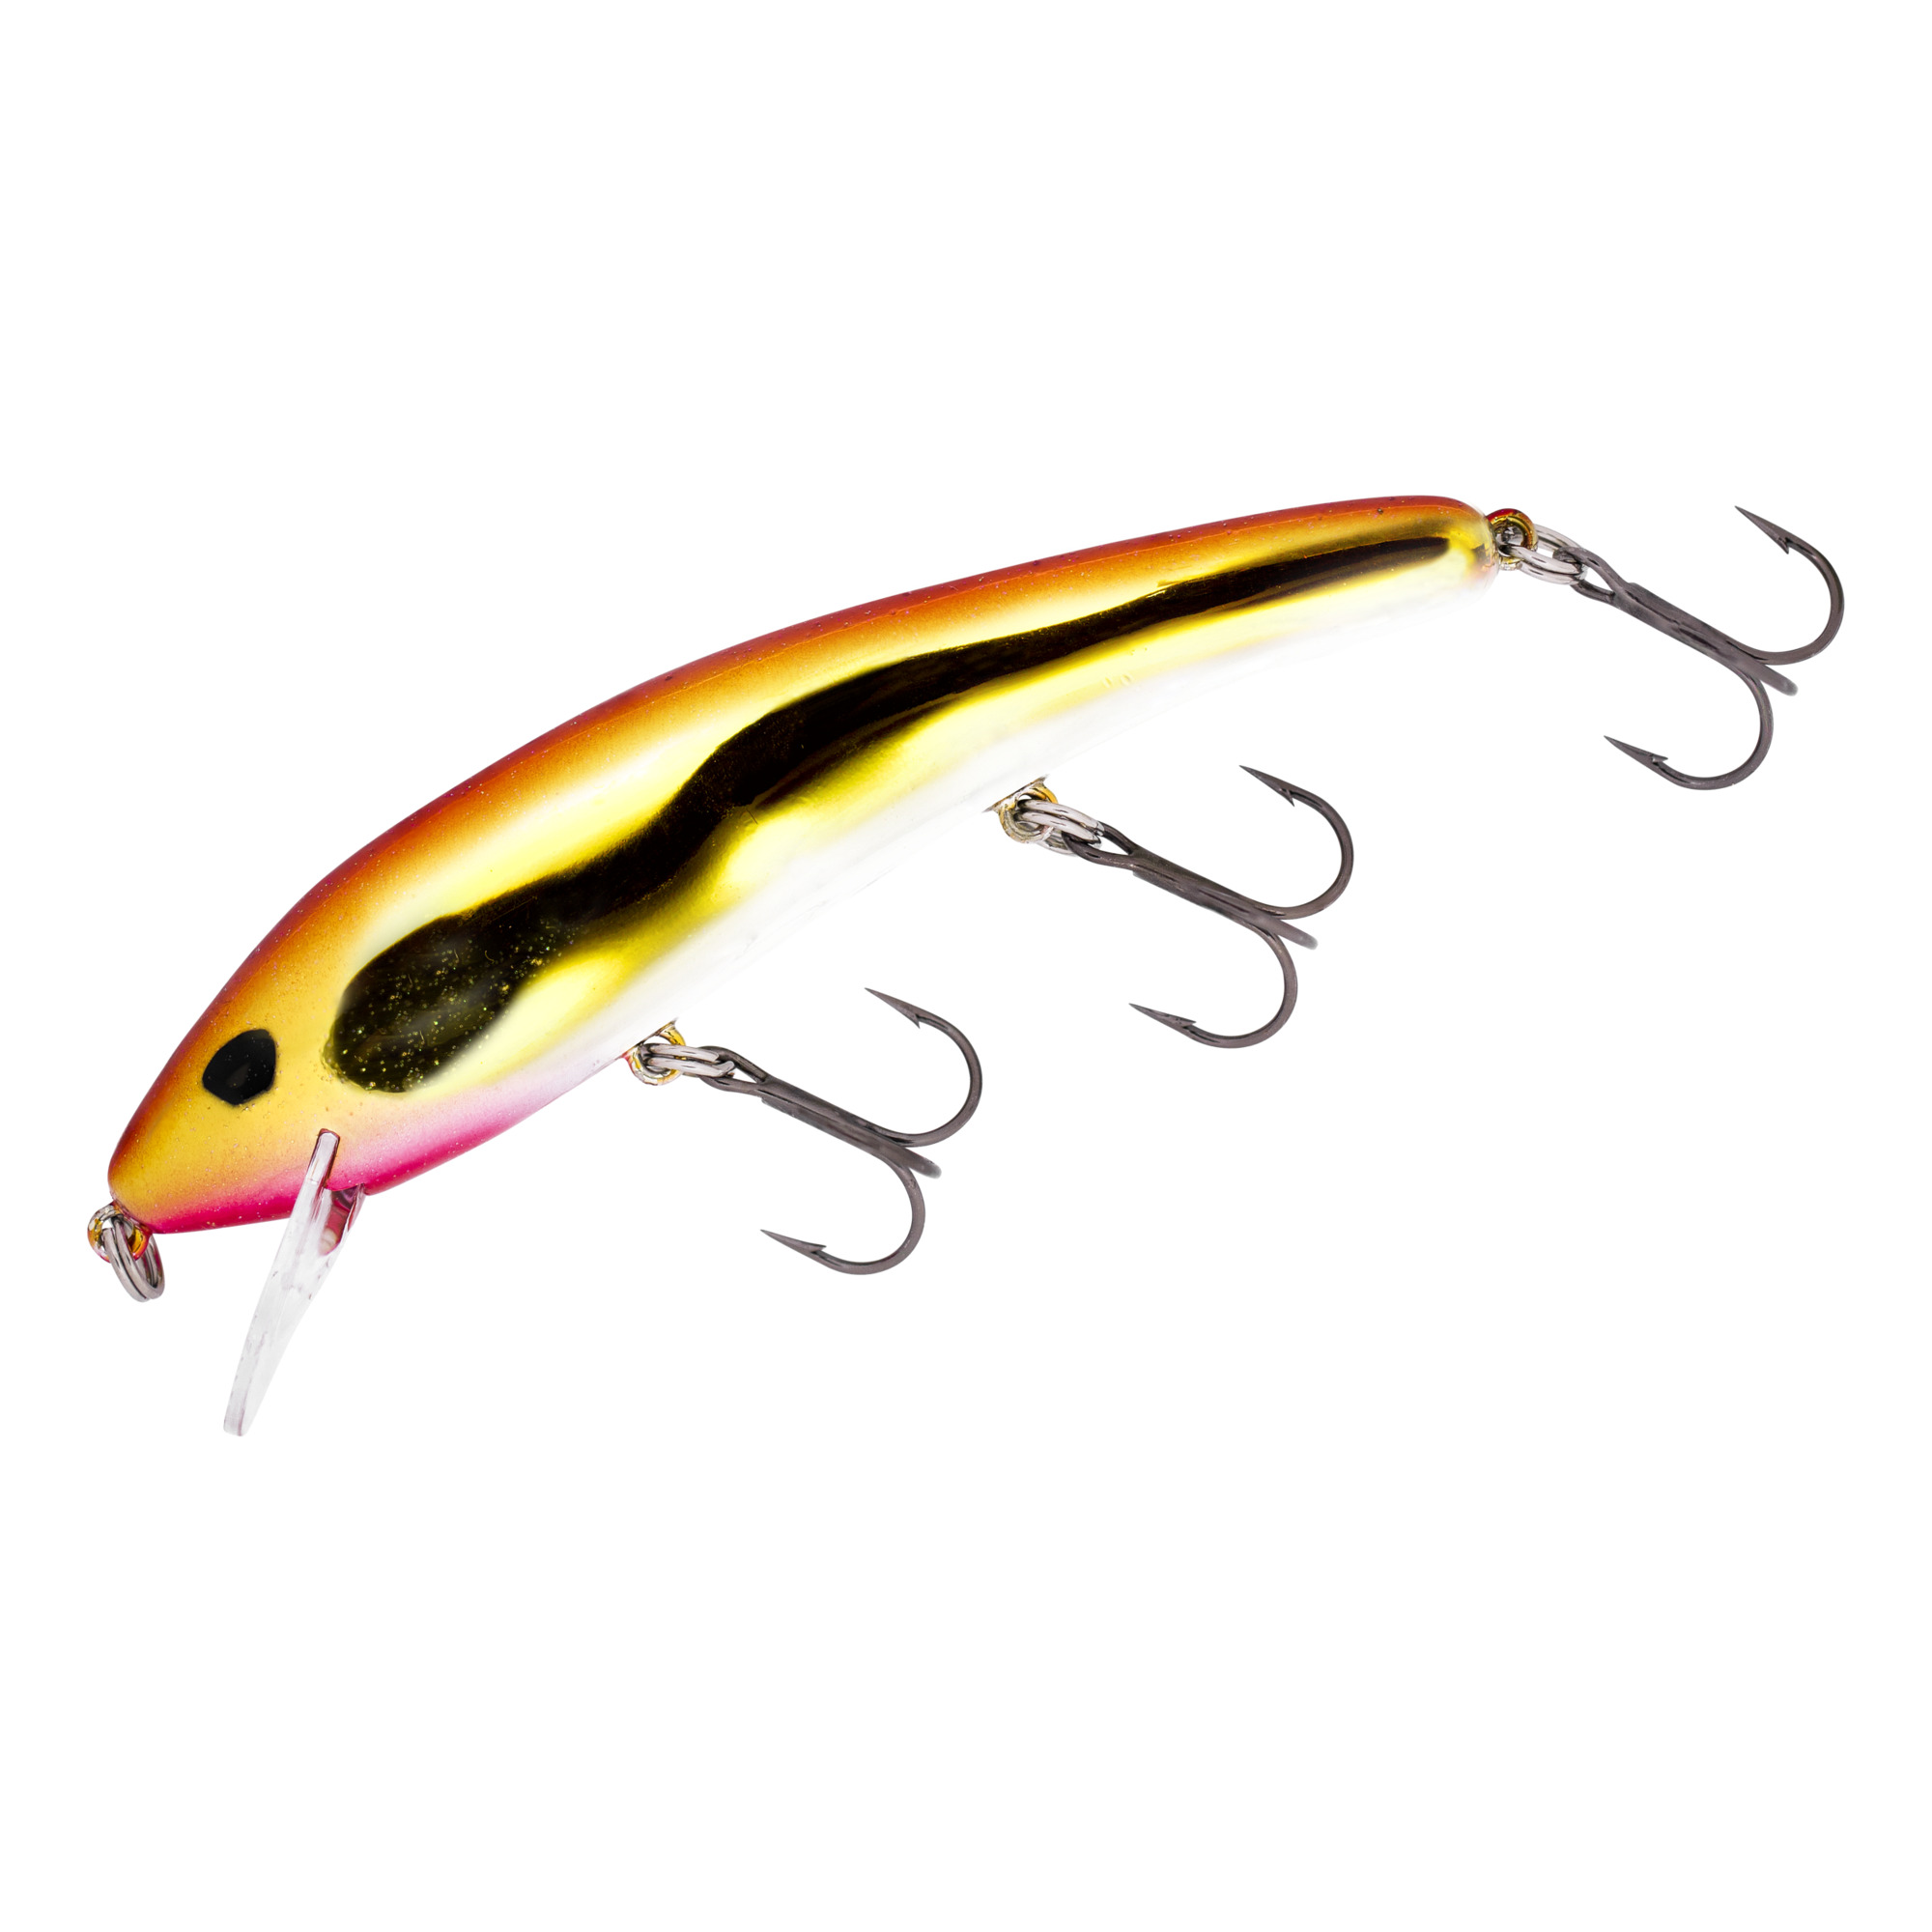 Cotton Cordell Deep Diving Red Fin Lures - All colors available